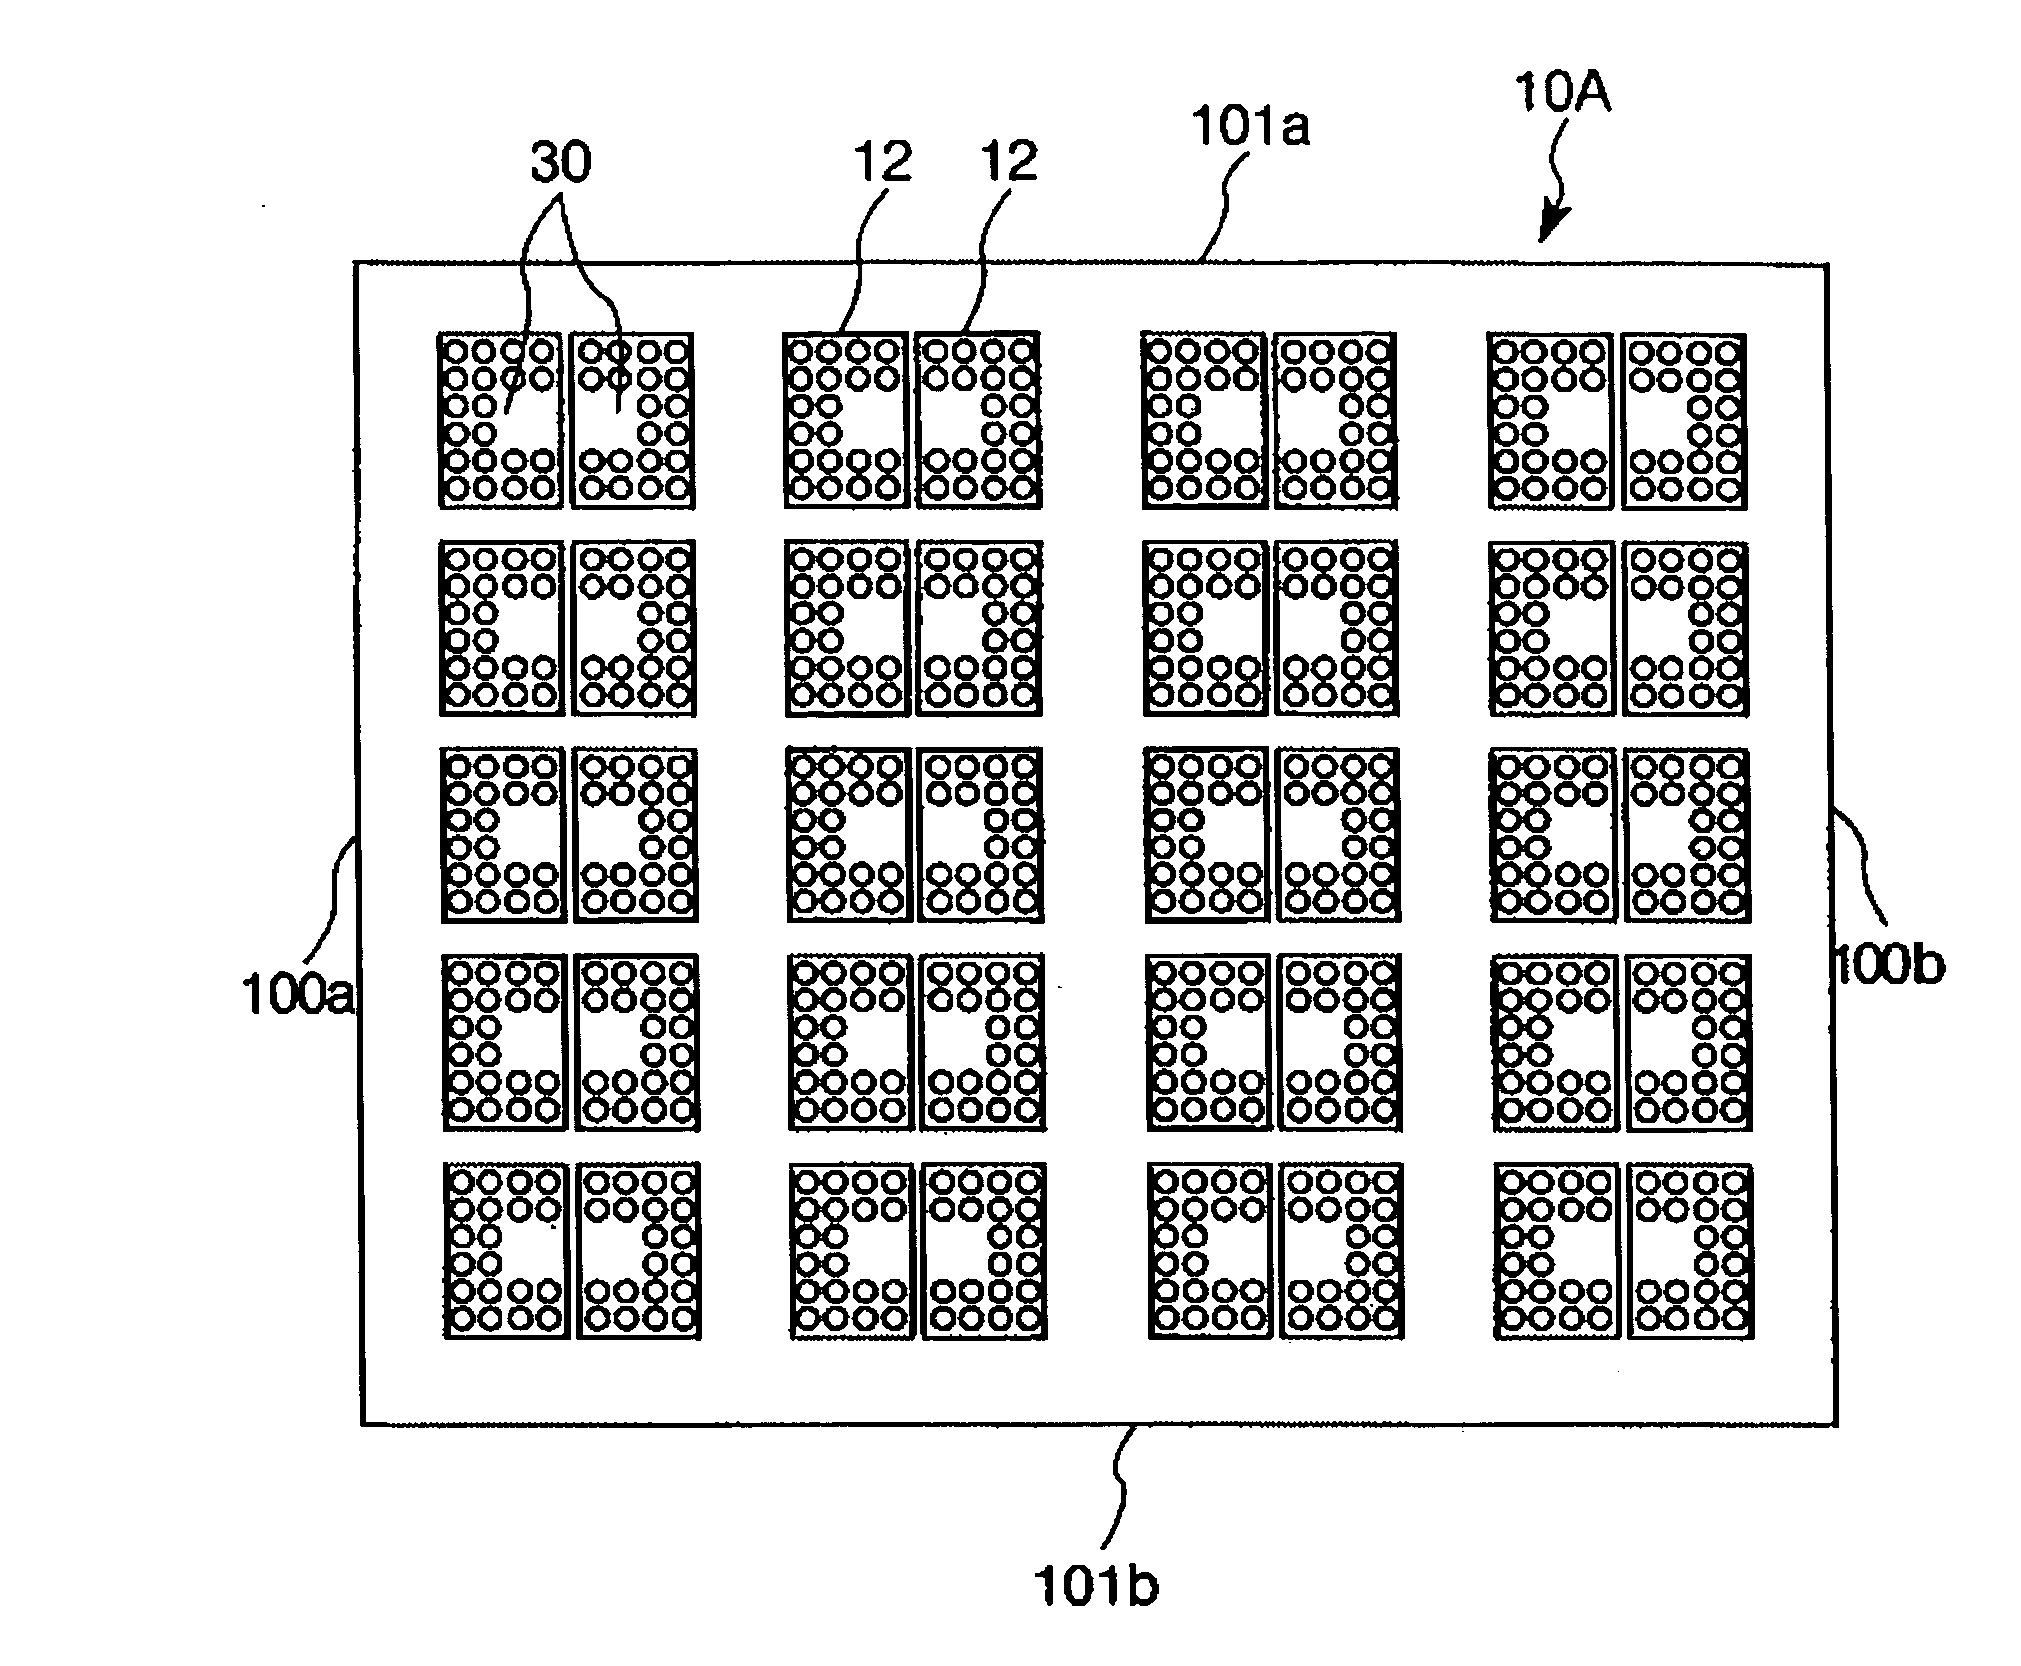 Apparatus for manufacturing semiconductor devices, method of manufacturing the semiconductor devices, and semiconductor device manufactured by the apparatus and method